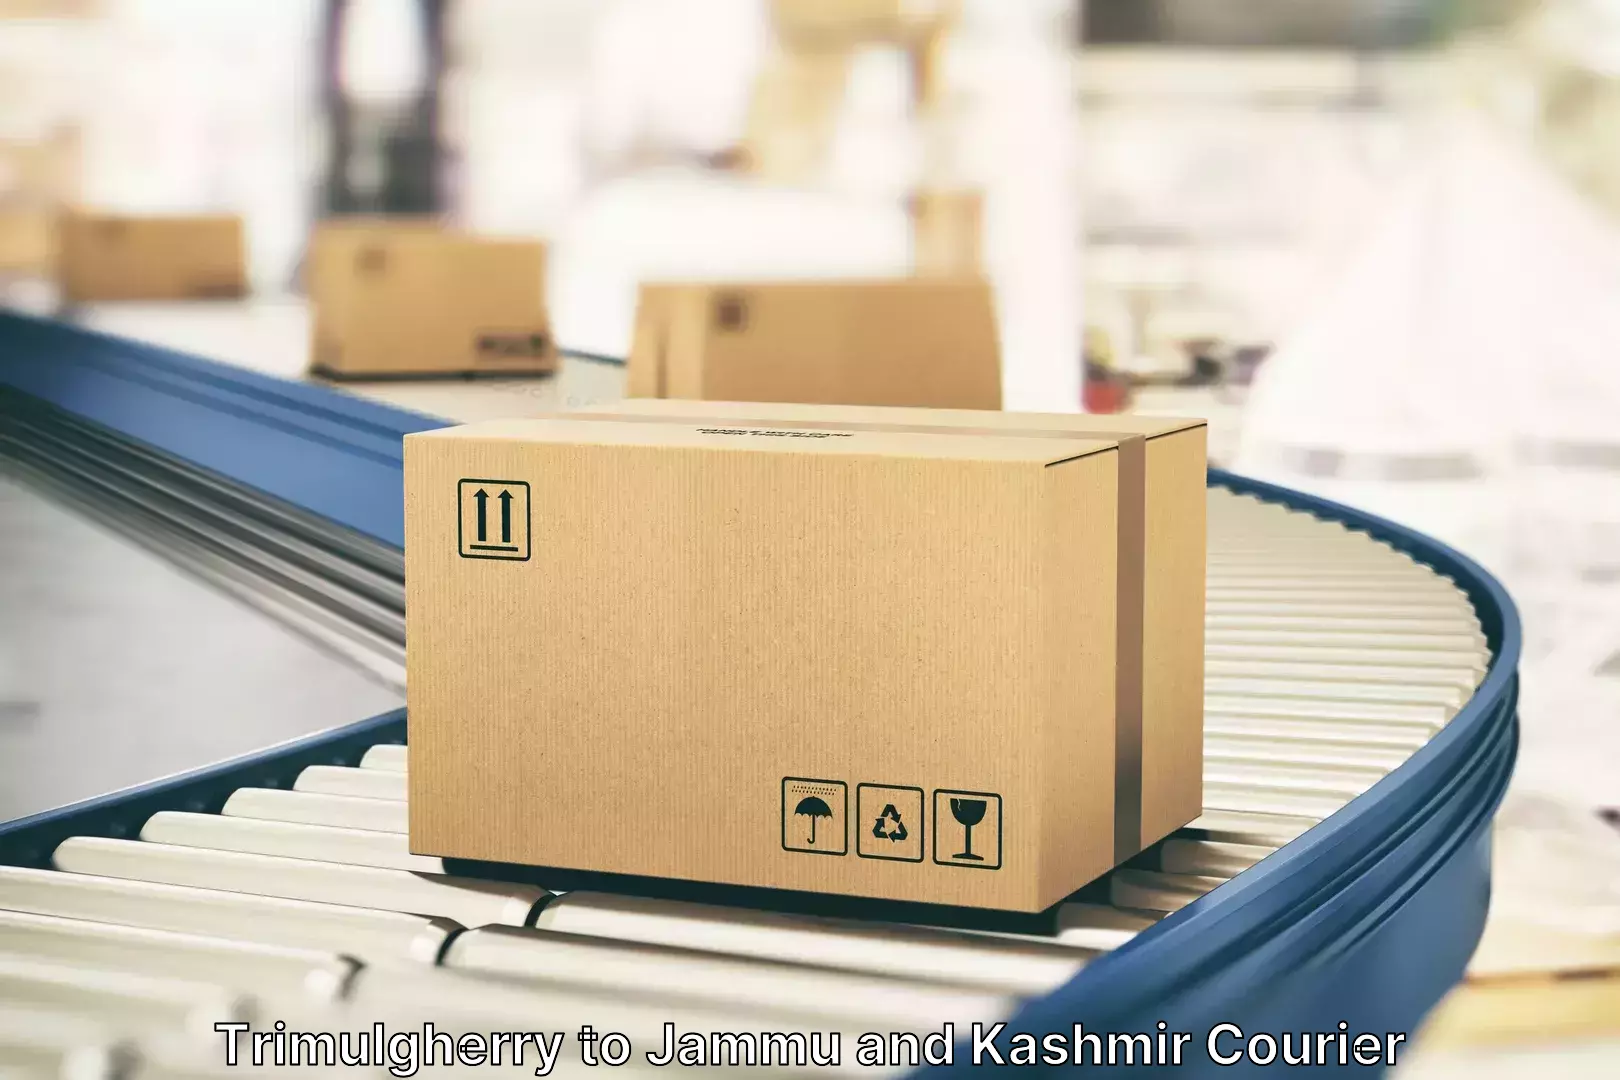 Luggage shipping discounts Trimulgherry to Jammu and Kashmir